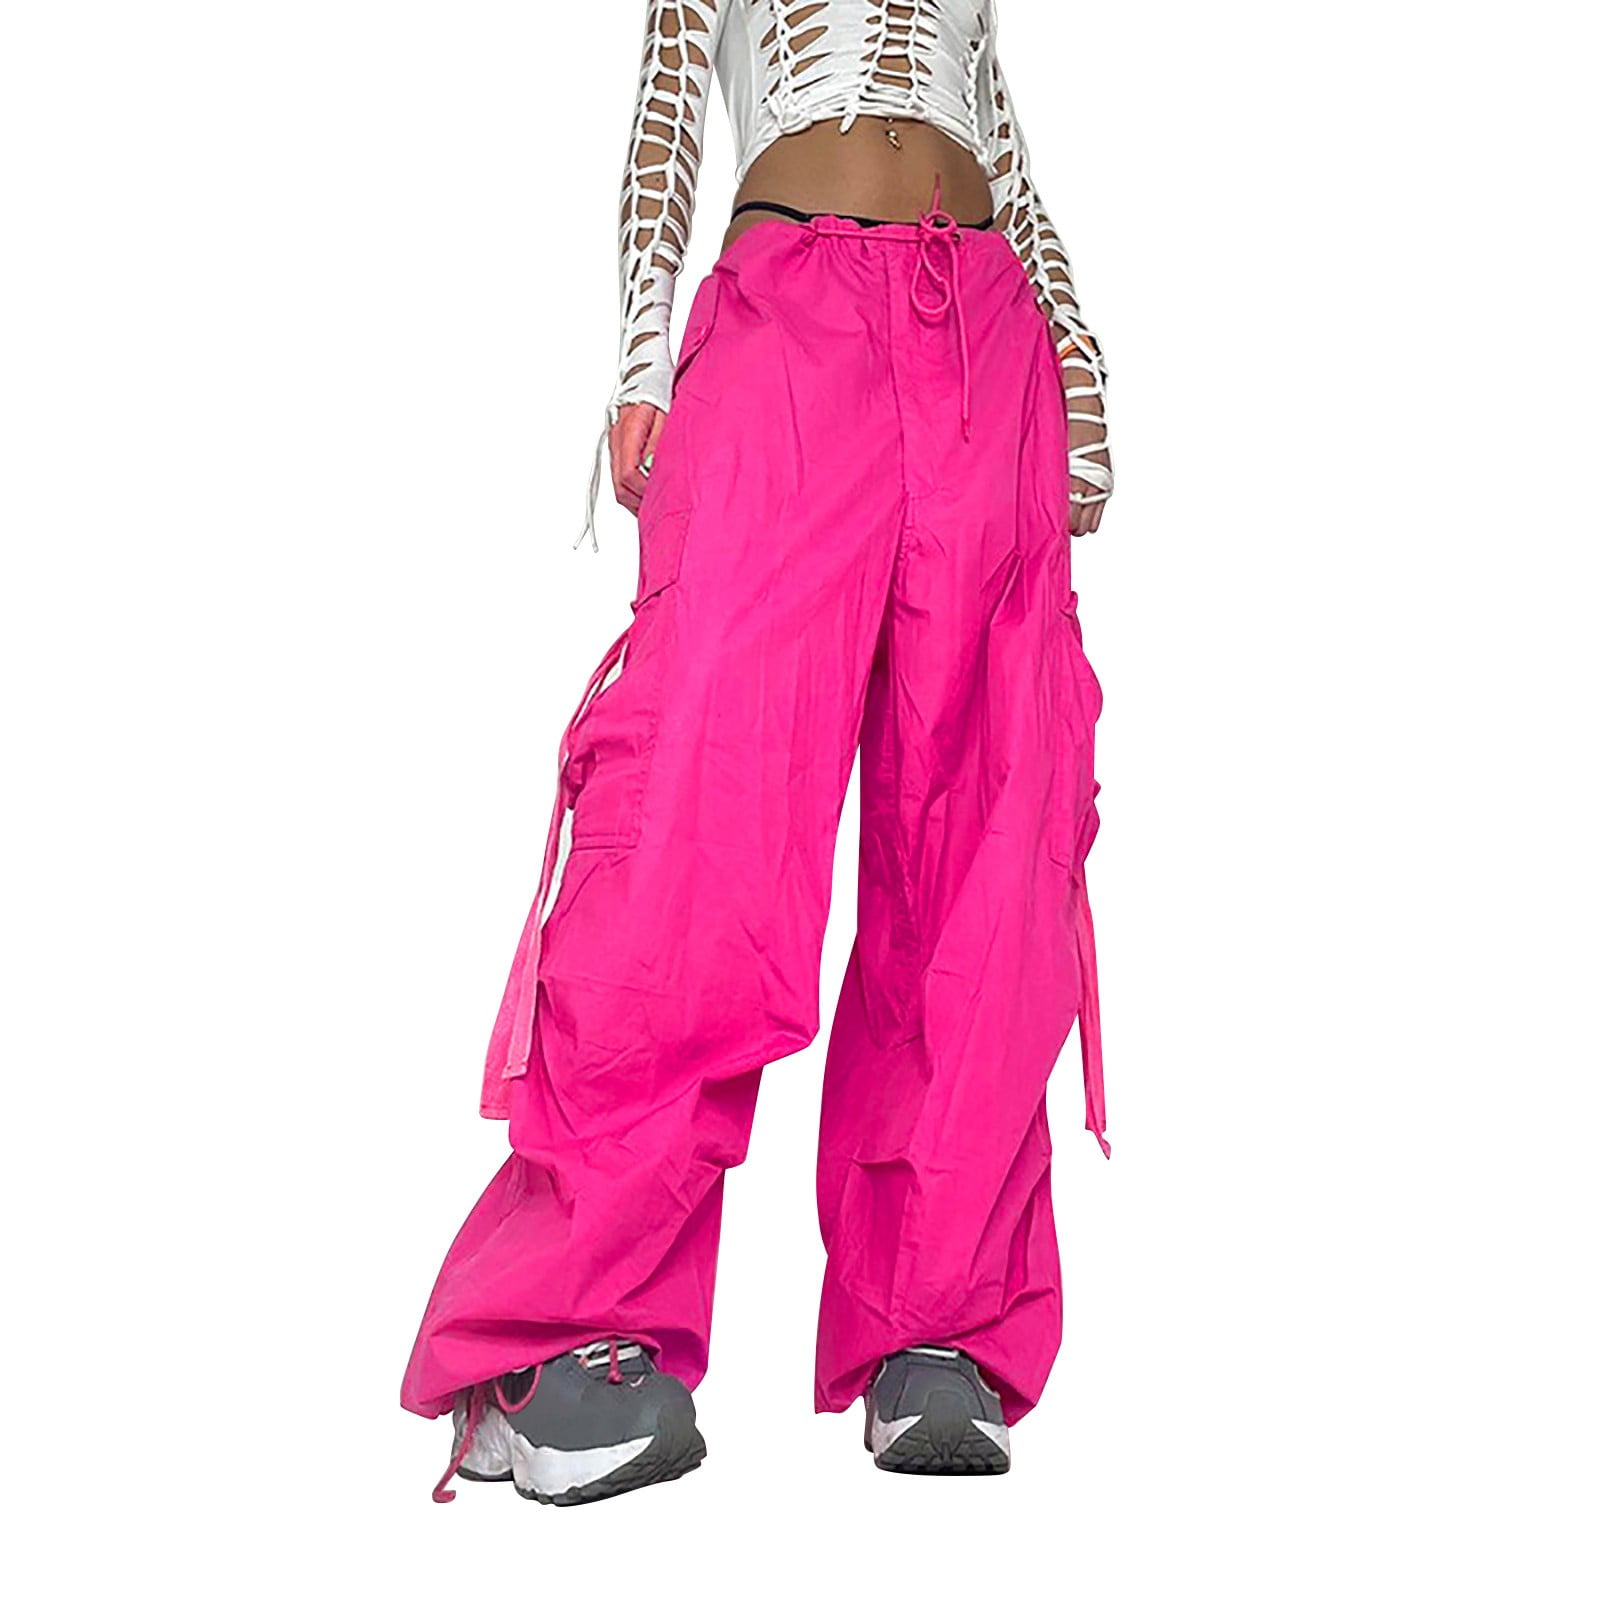 Get Your Sexy on with These Seductive Cargo Pants